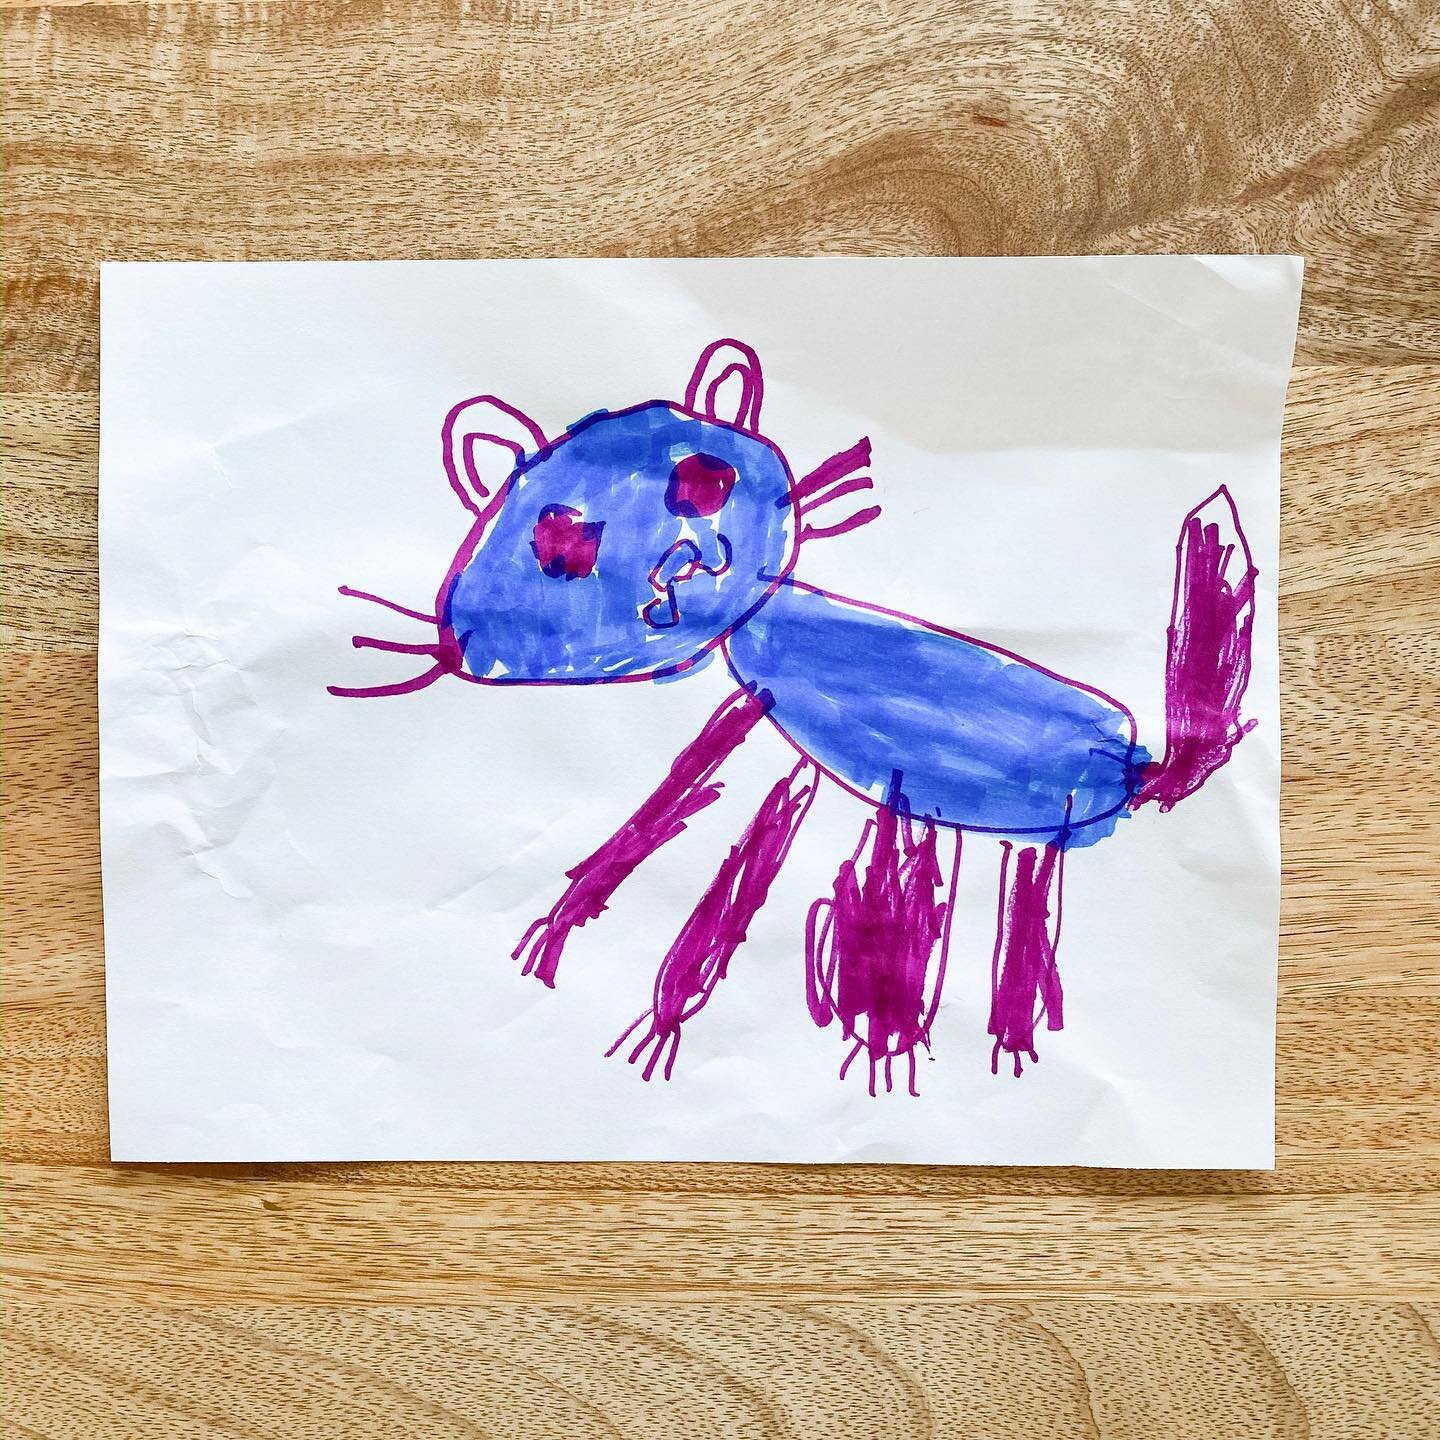 This morning Frankie drew the cat from our live drawing class yesterday from memory! It is so cool to see evidence of her little brain at work and to know that the time we spend with our kids makes a difference.
.
.
.
.
.
.
.
.
.
.
.
#kidsdrawing #ki